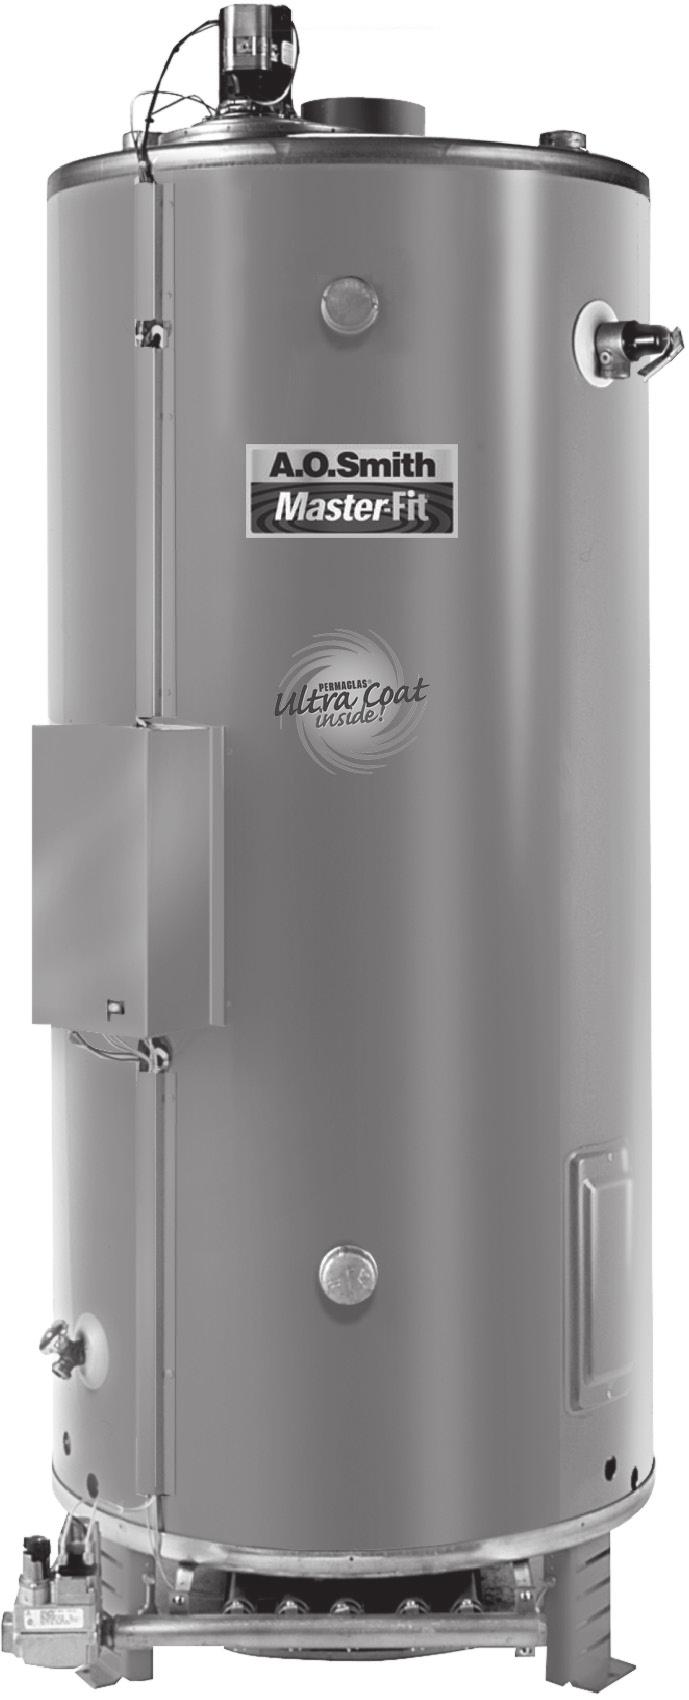 Instruction Manual Commercial gas water heaters MODELS BTN 120-400(A) Low NOx SERIES 108 500 Tennessee Waltz Parkway Ashland City, TN 37015 INSTALLATION - OPERATION - SERVICE - MAINTENANCE - LIMITED